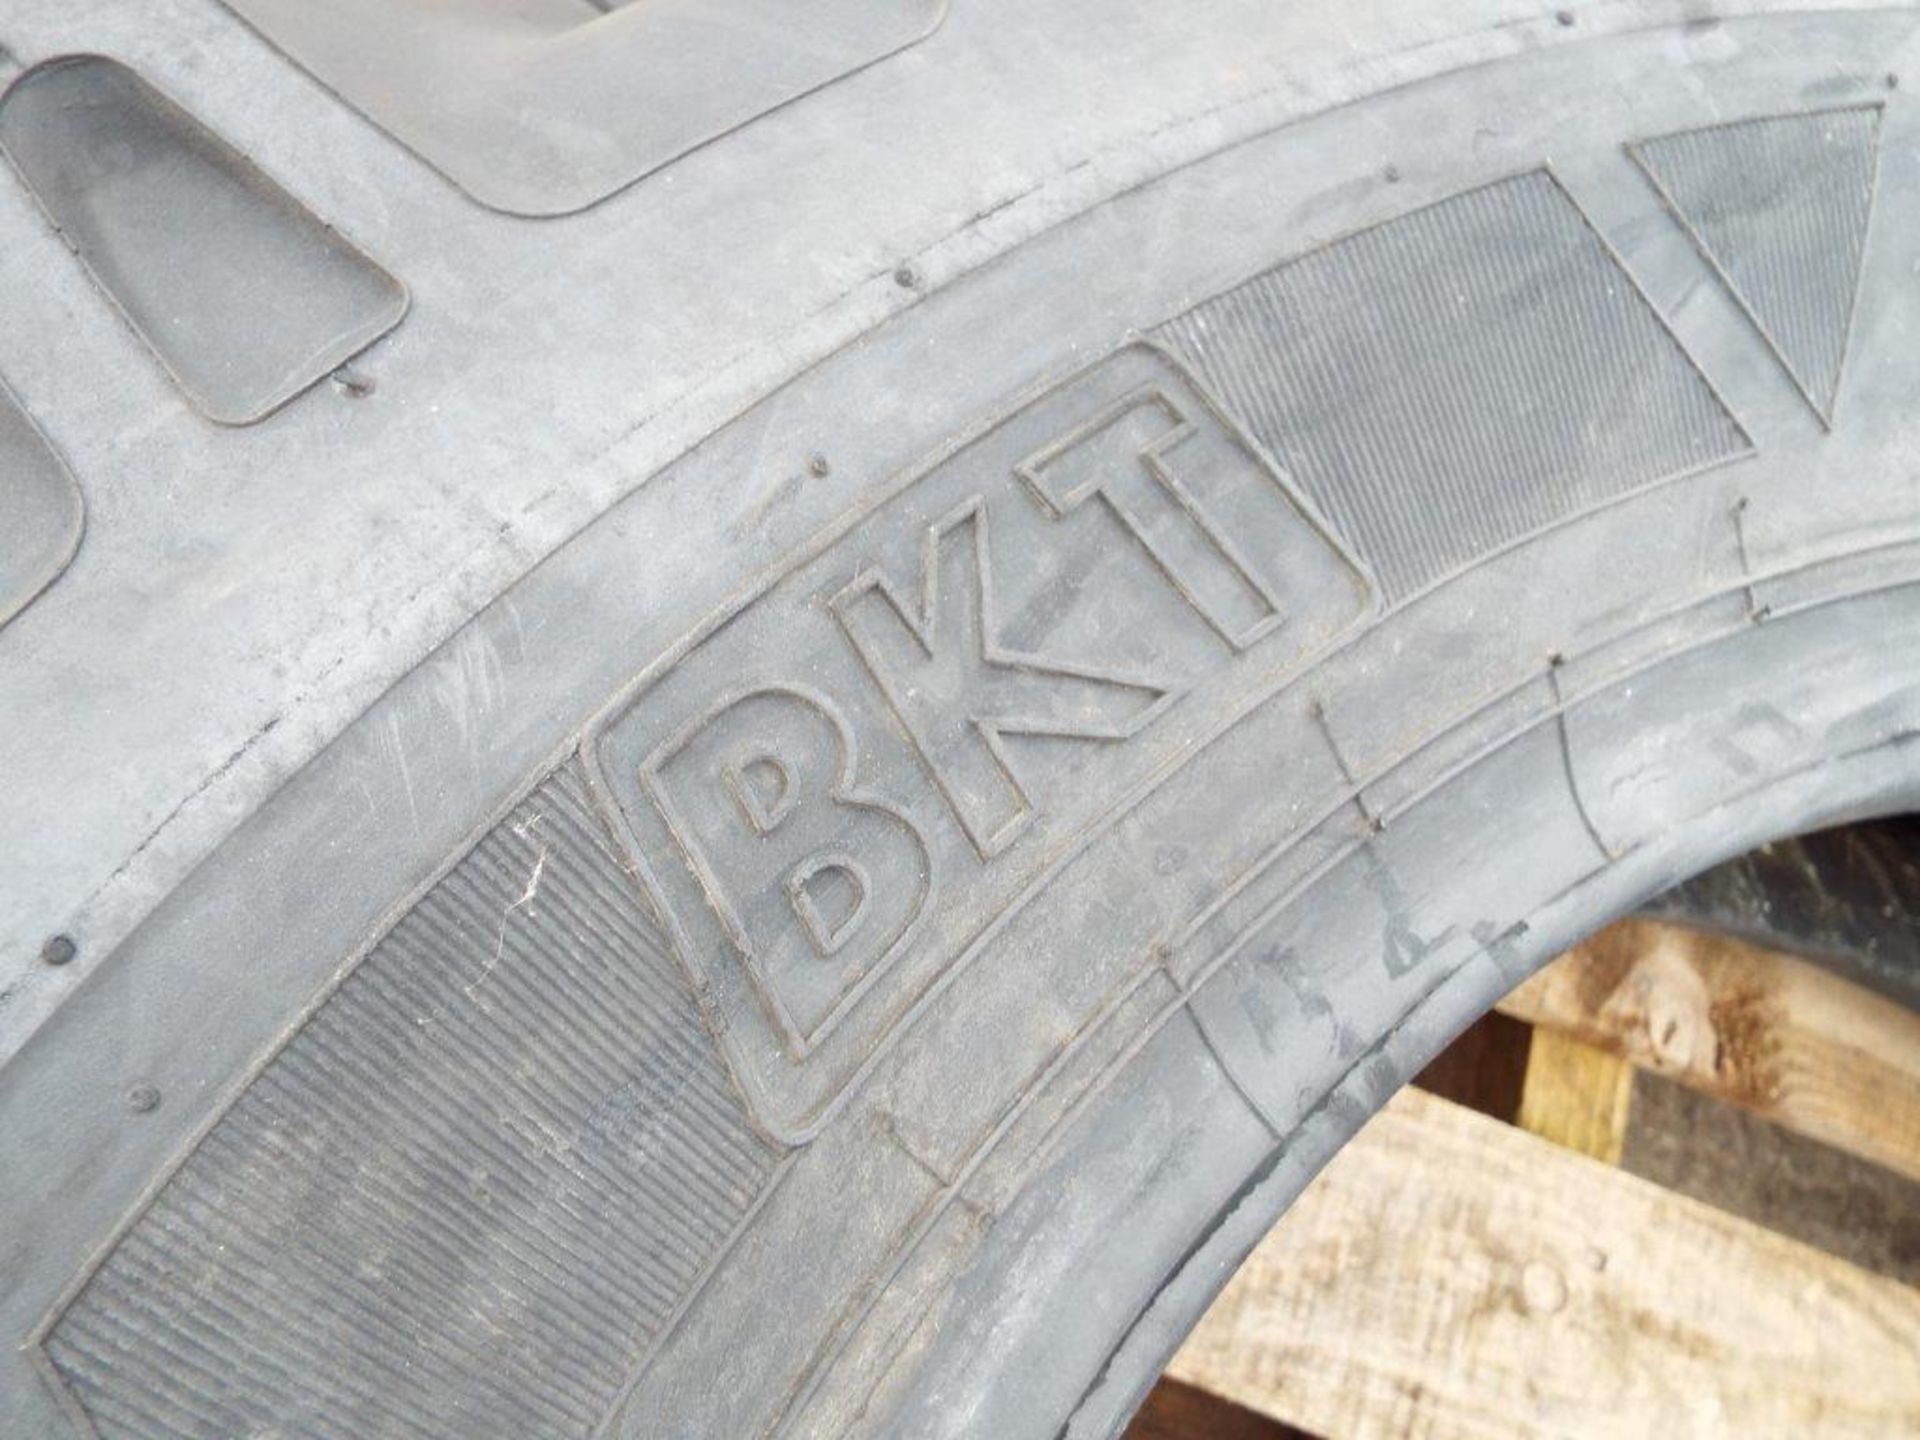 BKT MP567 10.5-18 MPT Tyre - Image 2 of 6